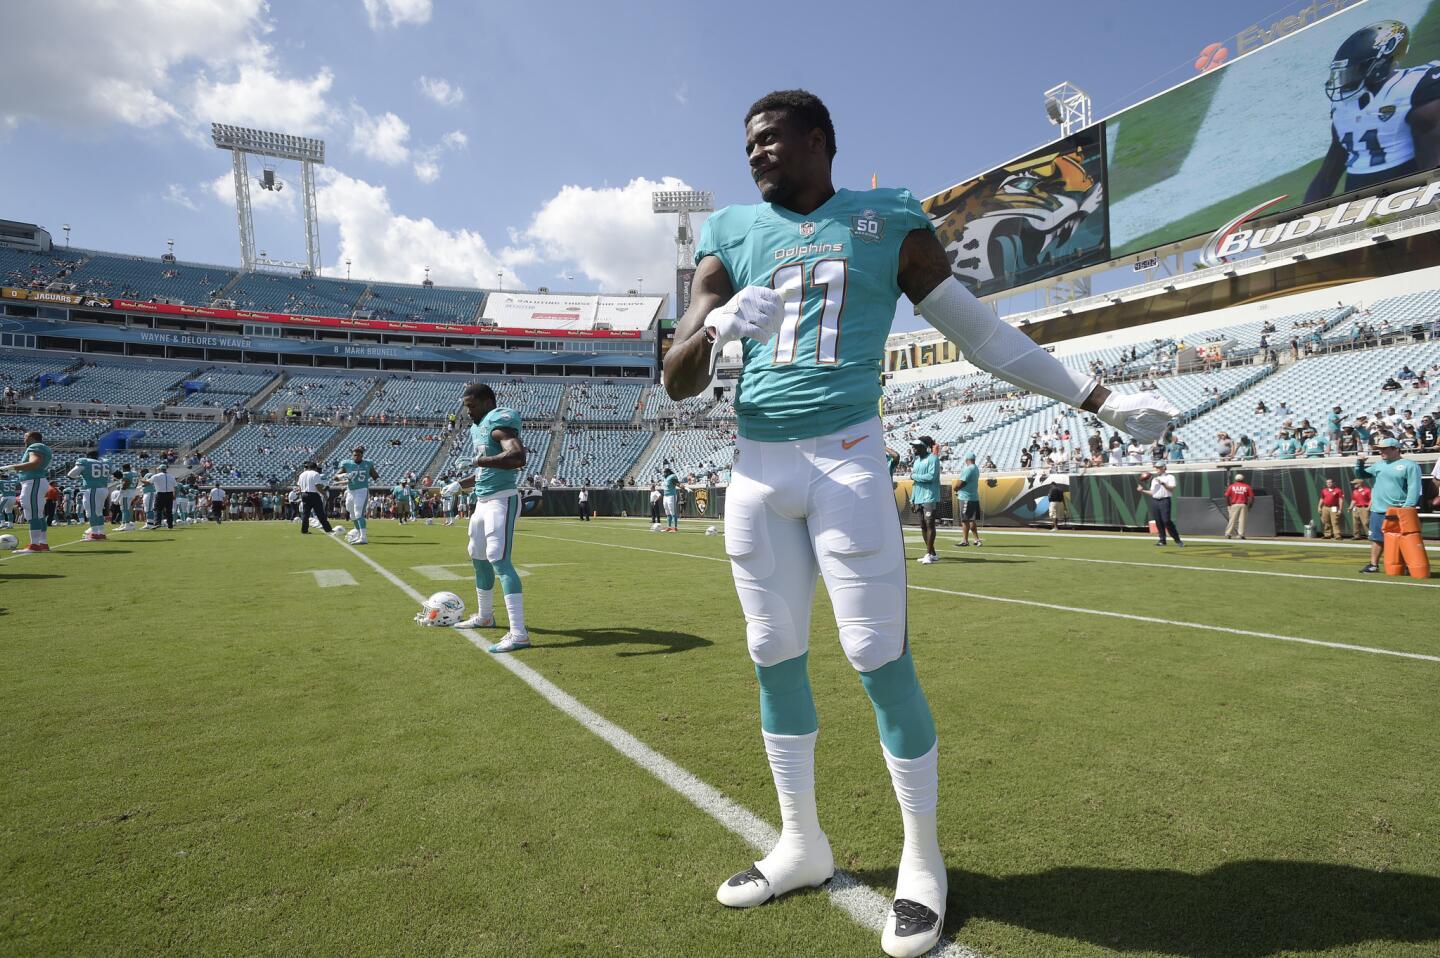 DeVante Parker was a little further integrated into the game